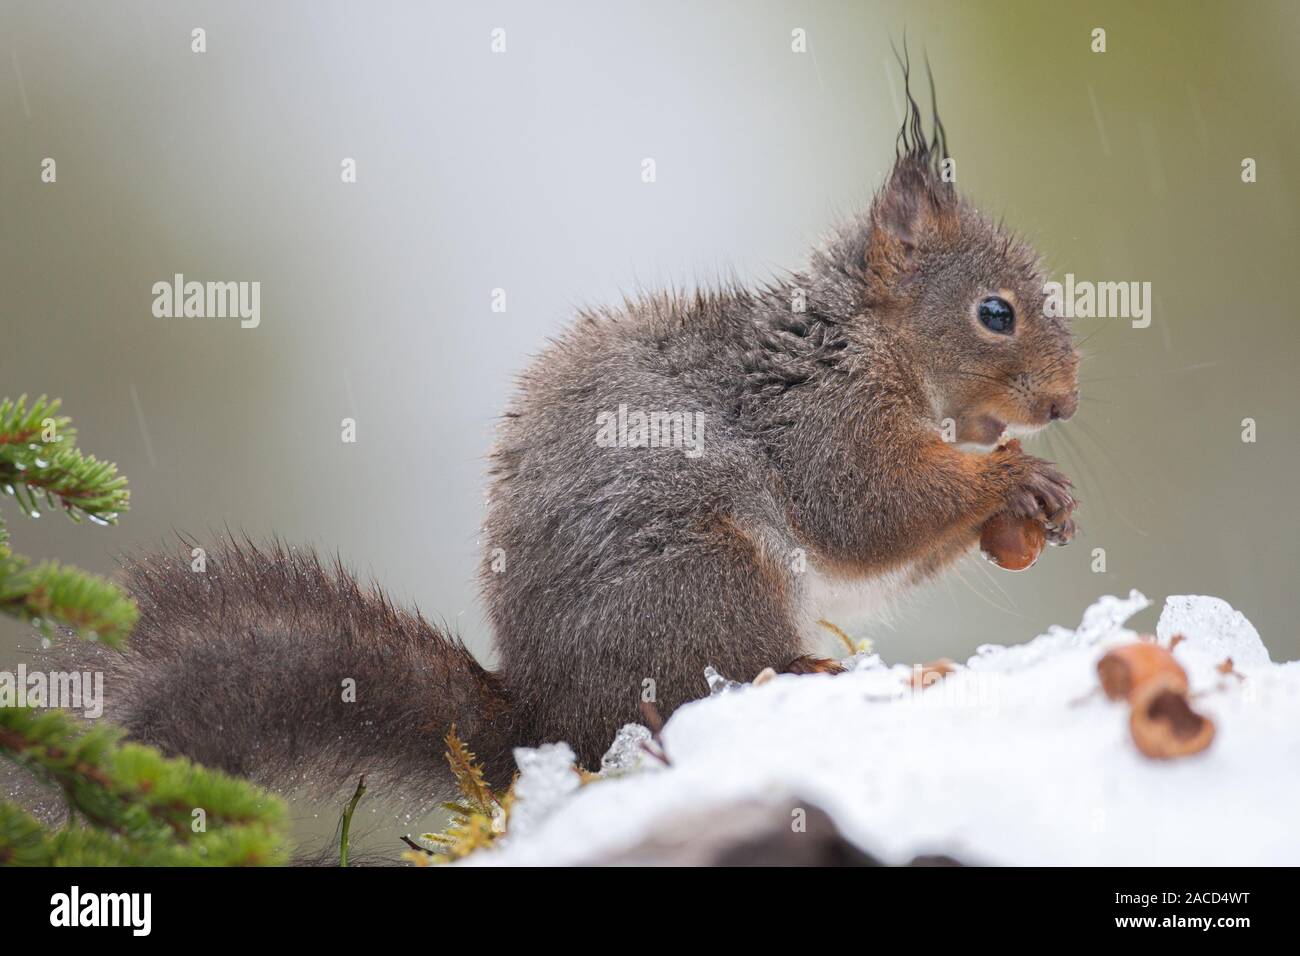 Red Squirrel eating nuts and foraging for good in the snow Stock Photo